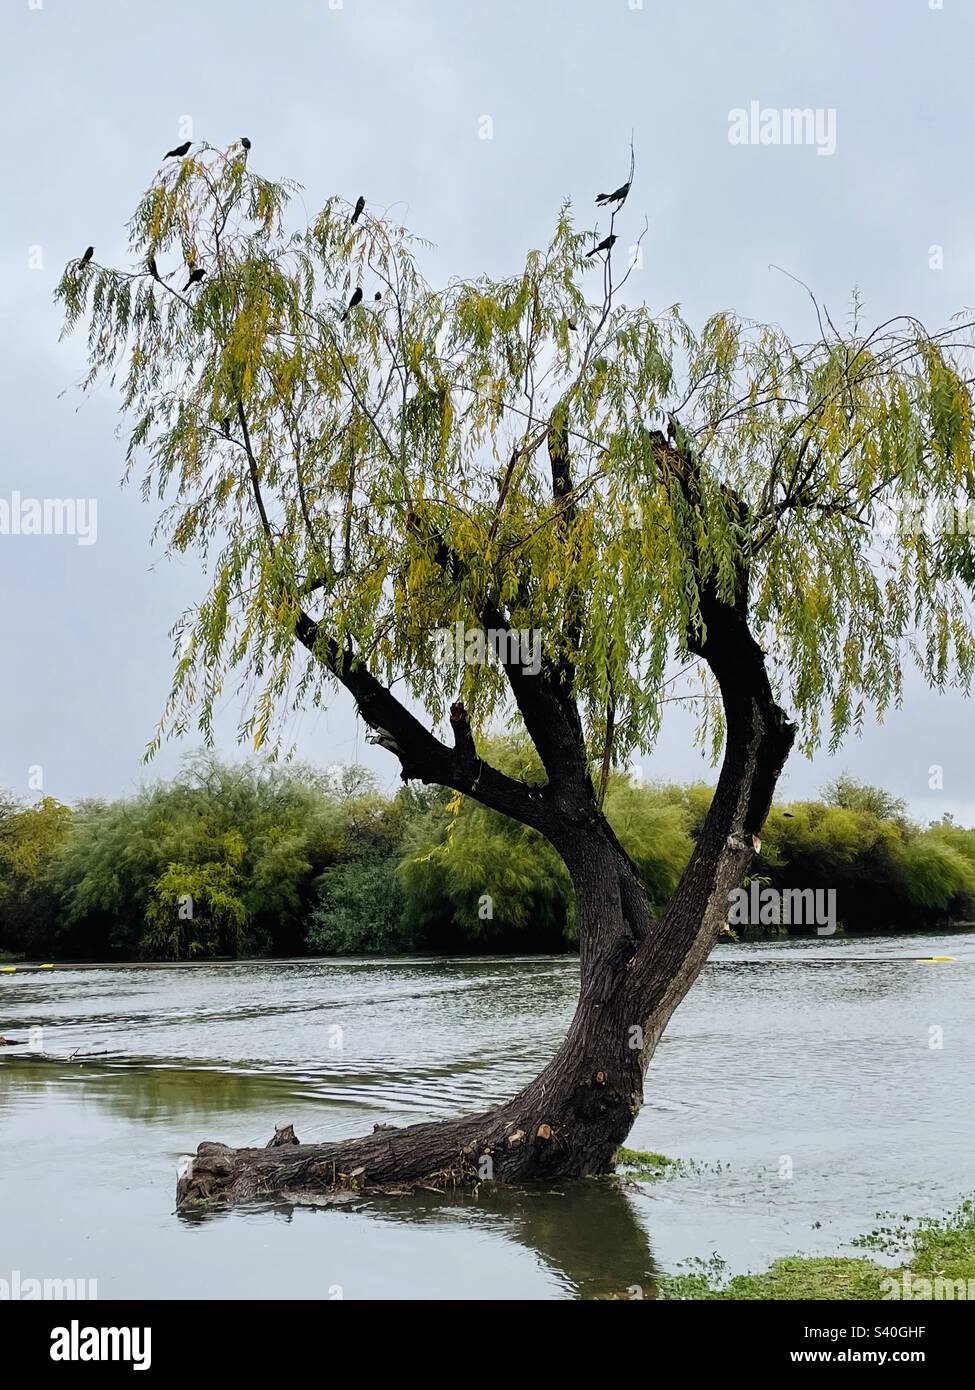 Grackles grasping wispy willow branches amidst stormy floodwaters Stock Photo